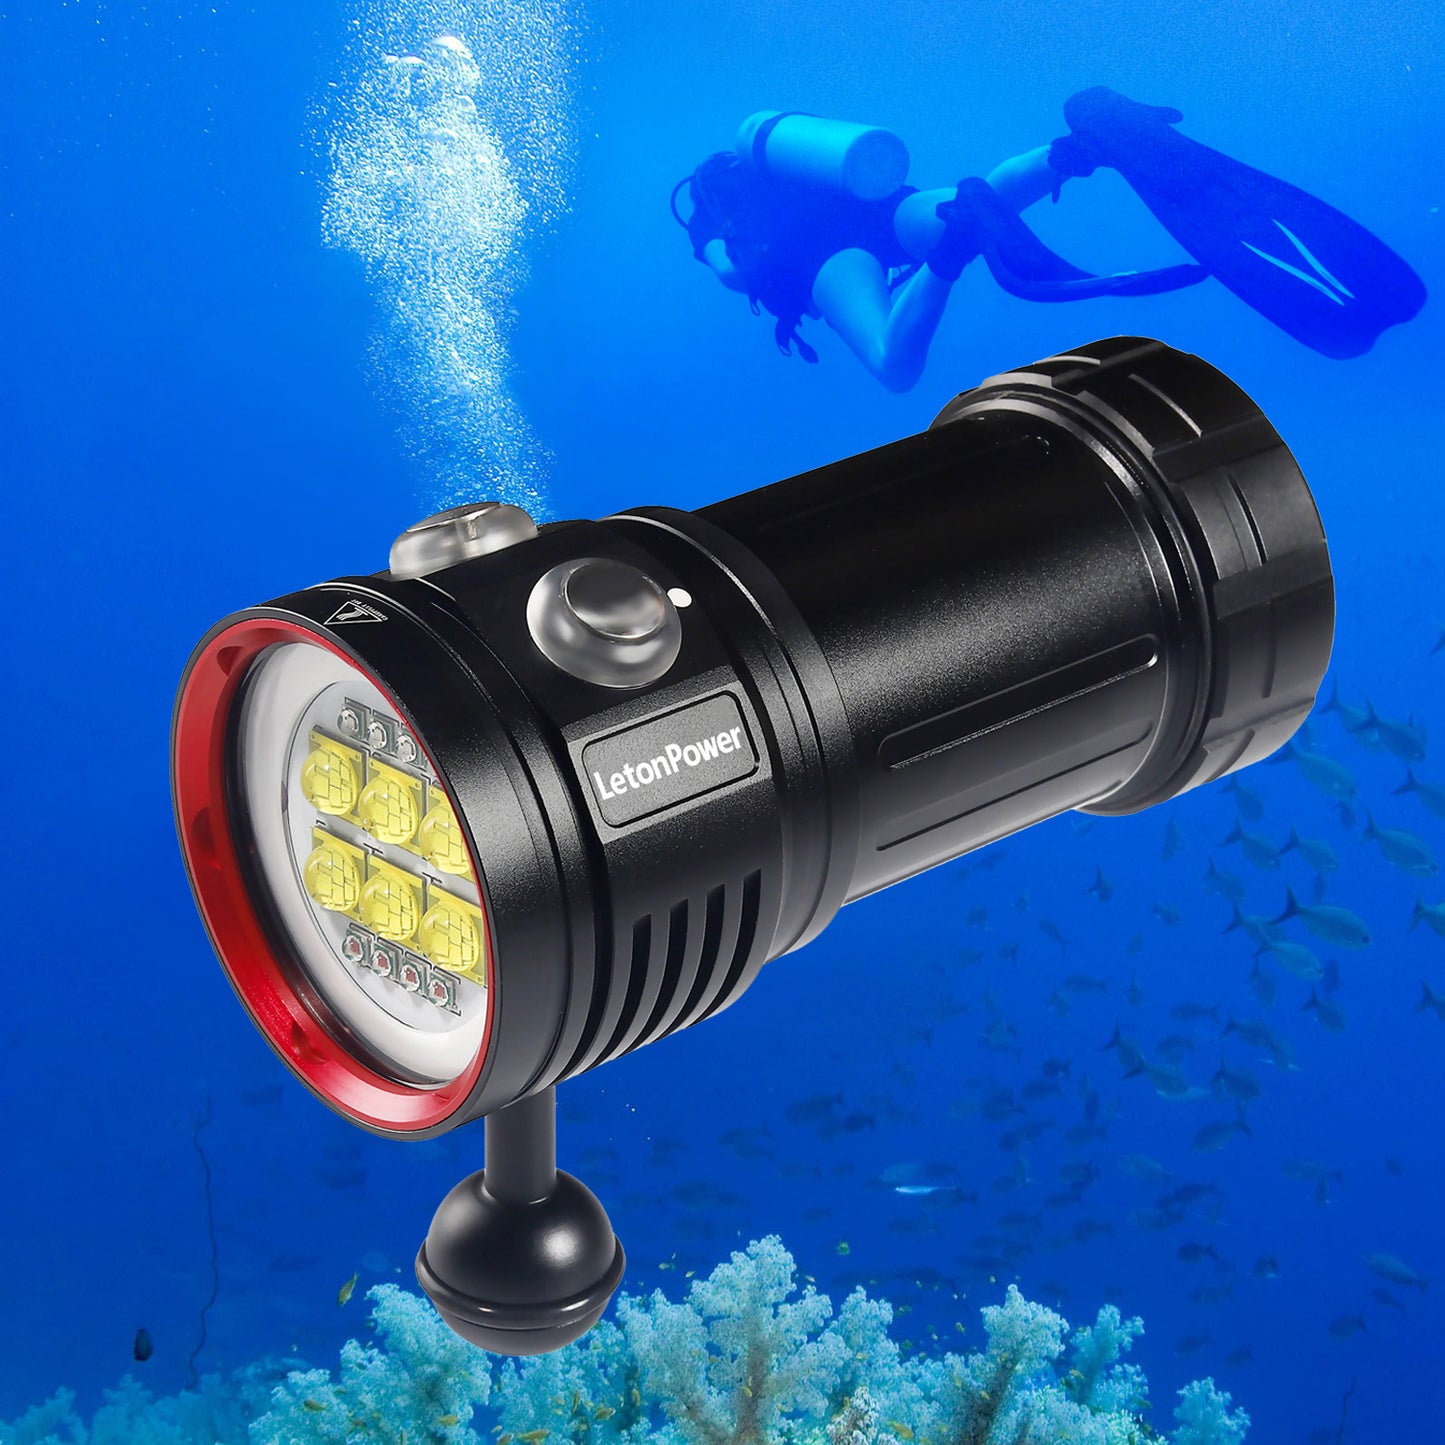 Diving Flashlight,LetonPower L24 12000Lumens Dive Light,100m Underwater Video Light, Scuba Dive Lights, Underwater flashlights with Type-C Charging for Professional Under Water Sports